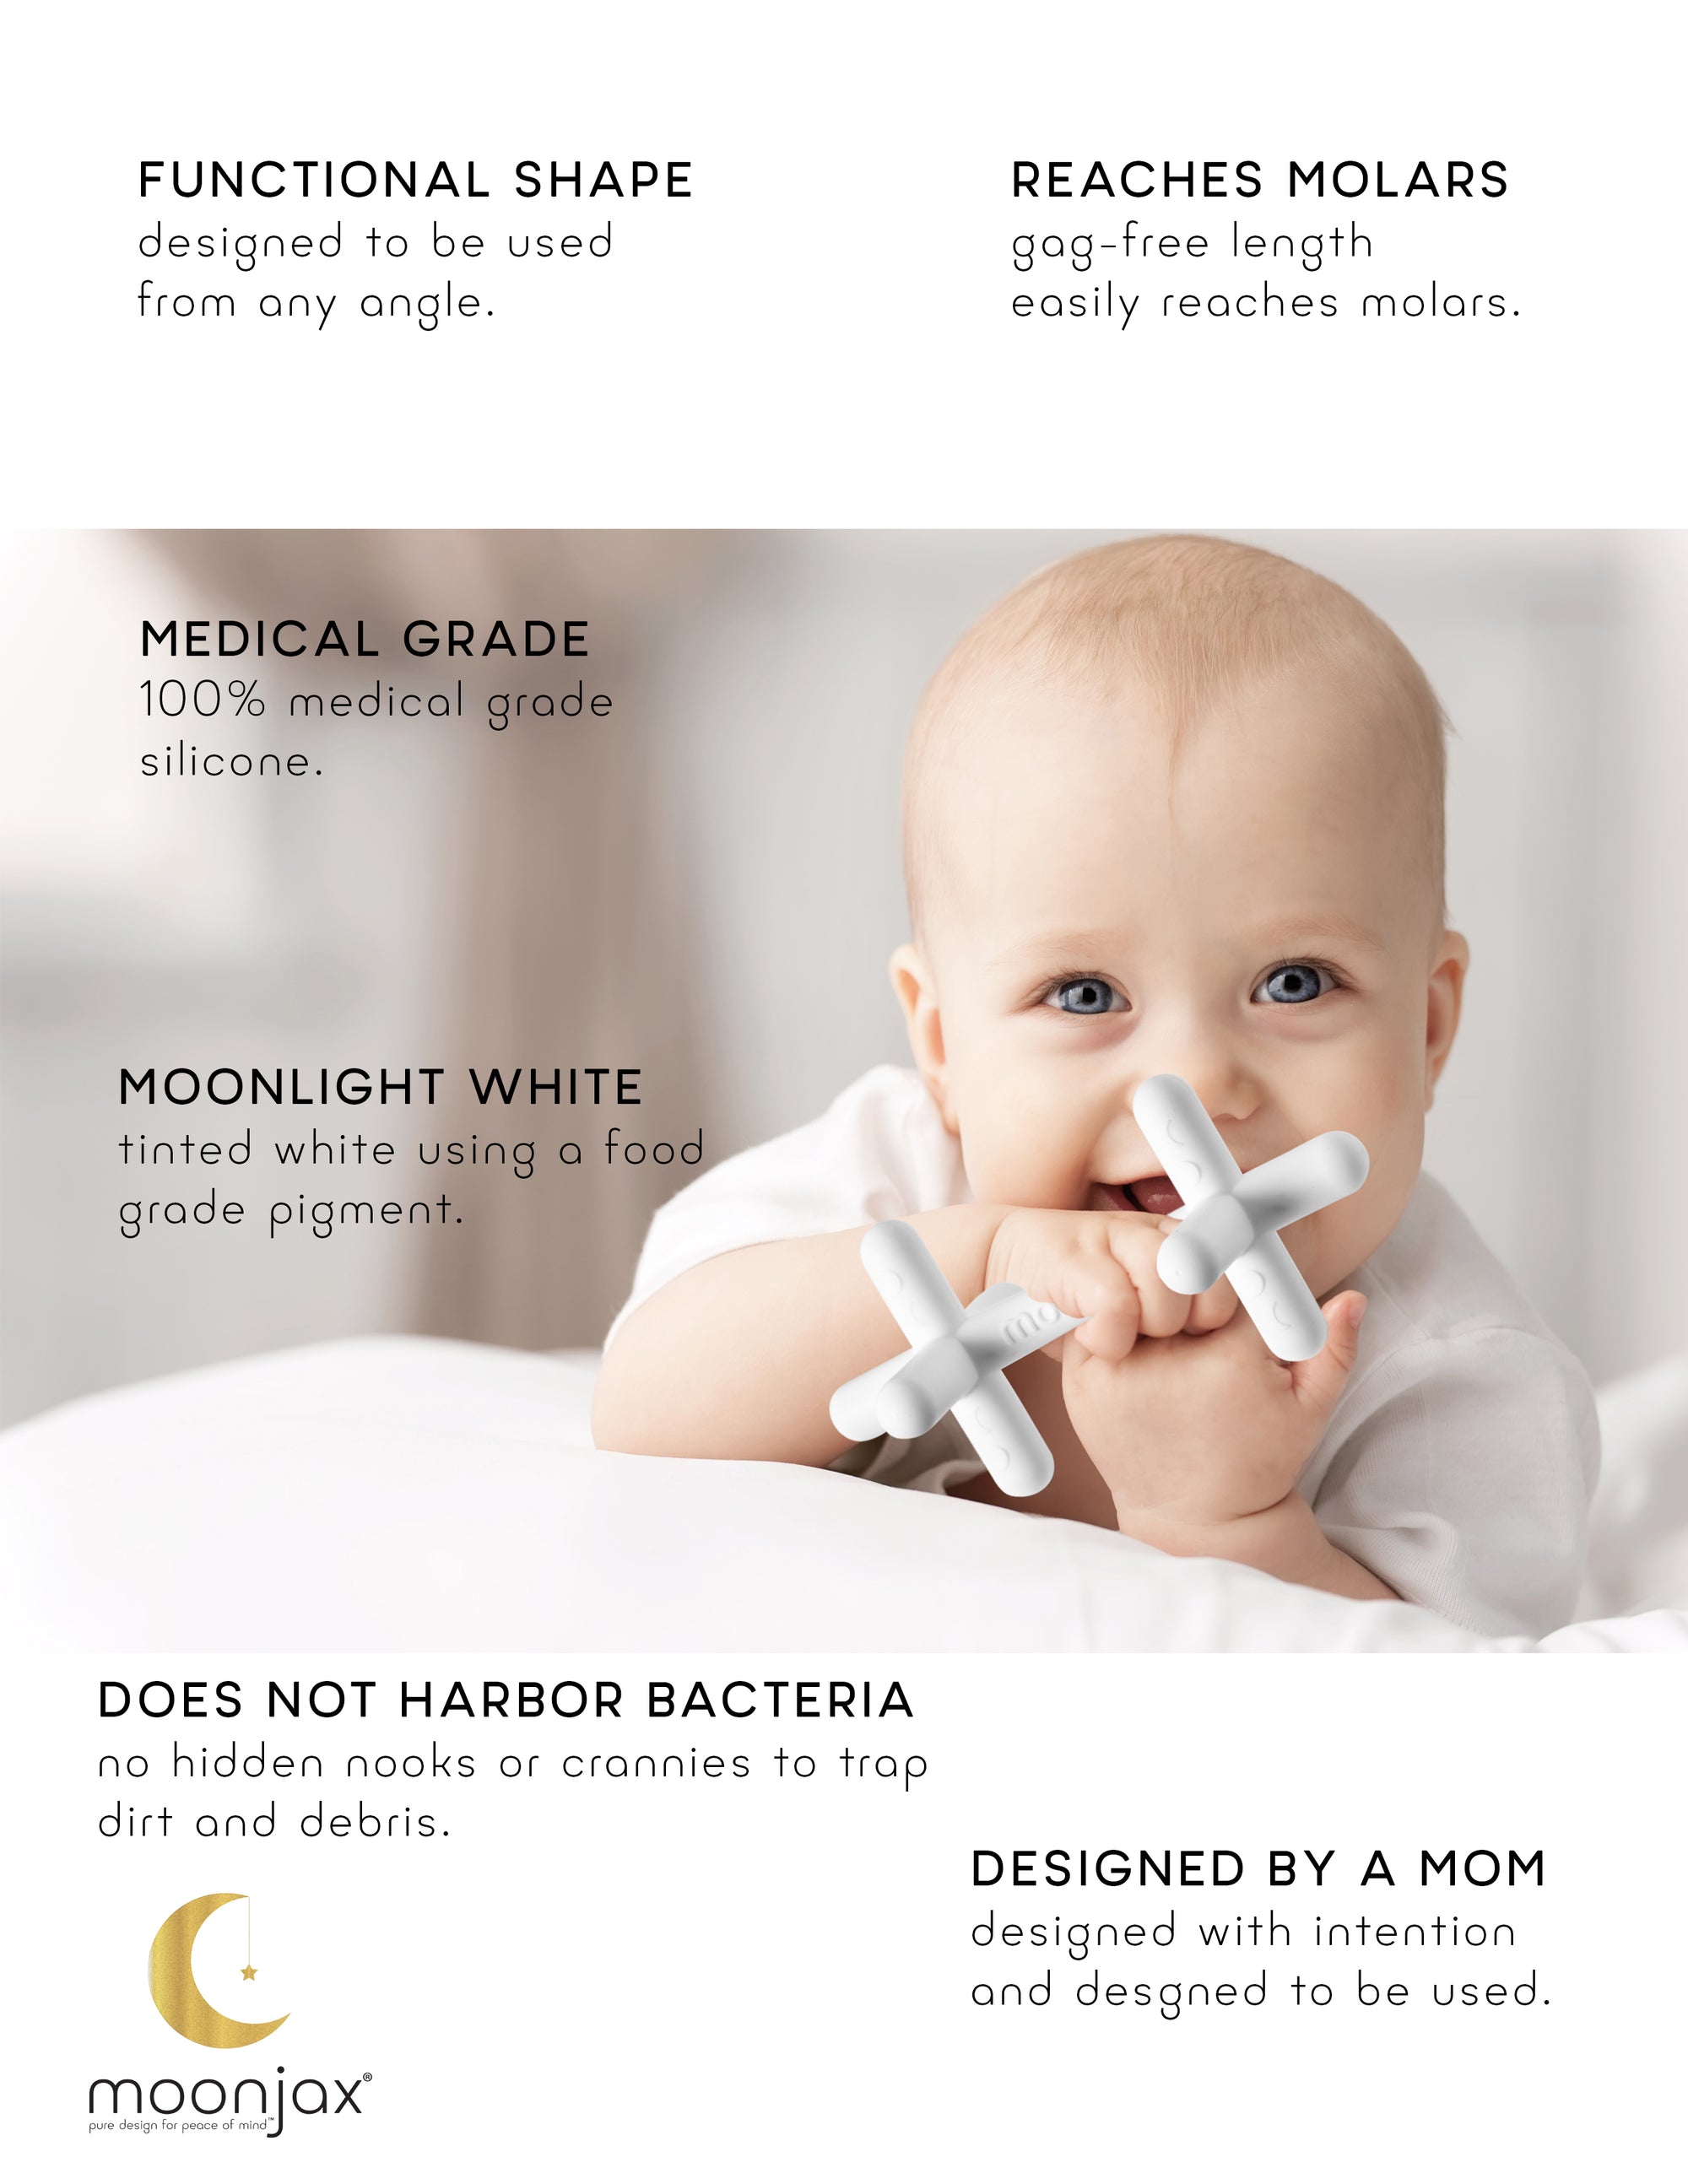 The best baby teether: 1-pack moonlight white silicone teether